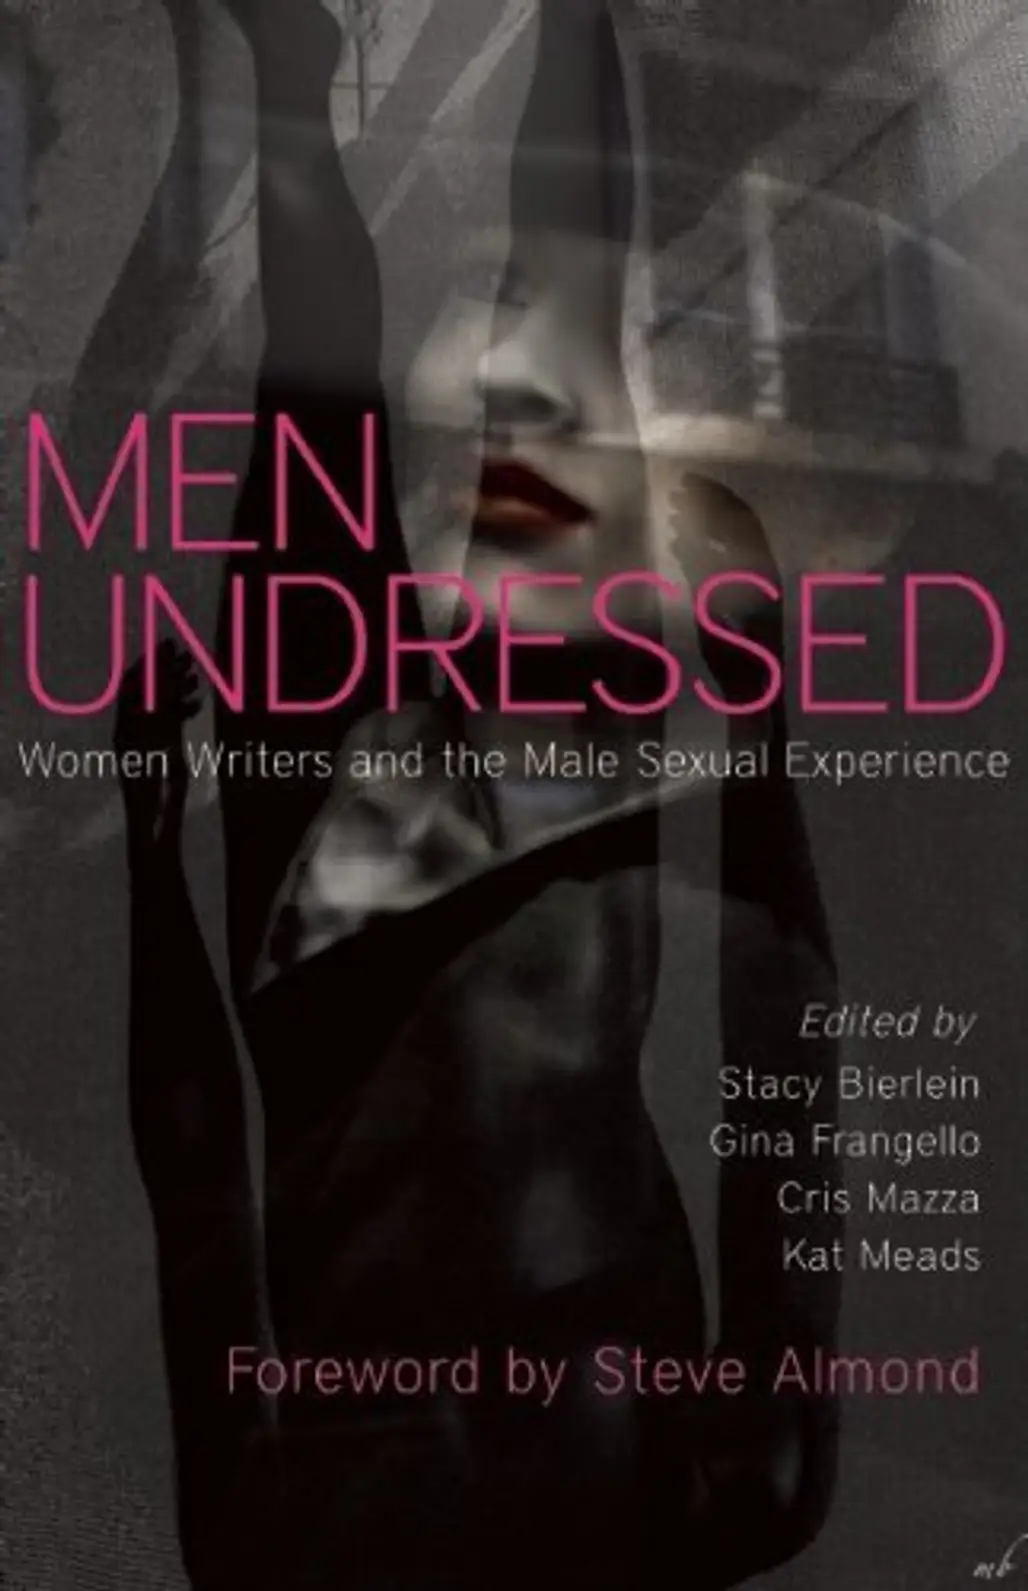 Men Undressed: Women Writers on the Male Sexual Experience by Various Authors